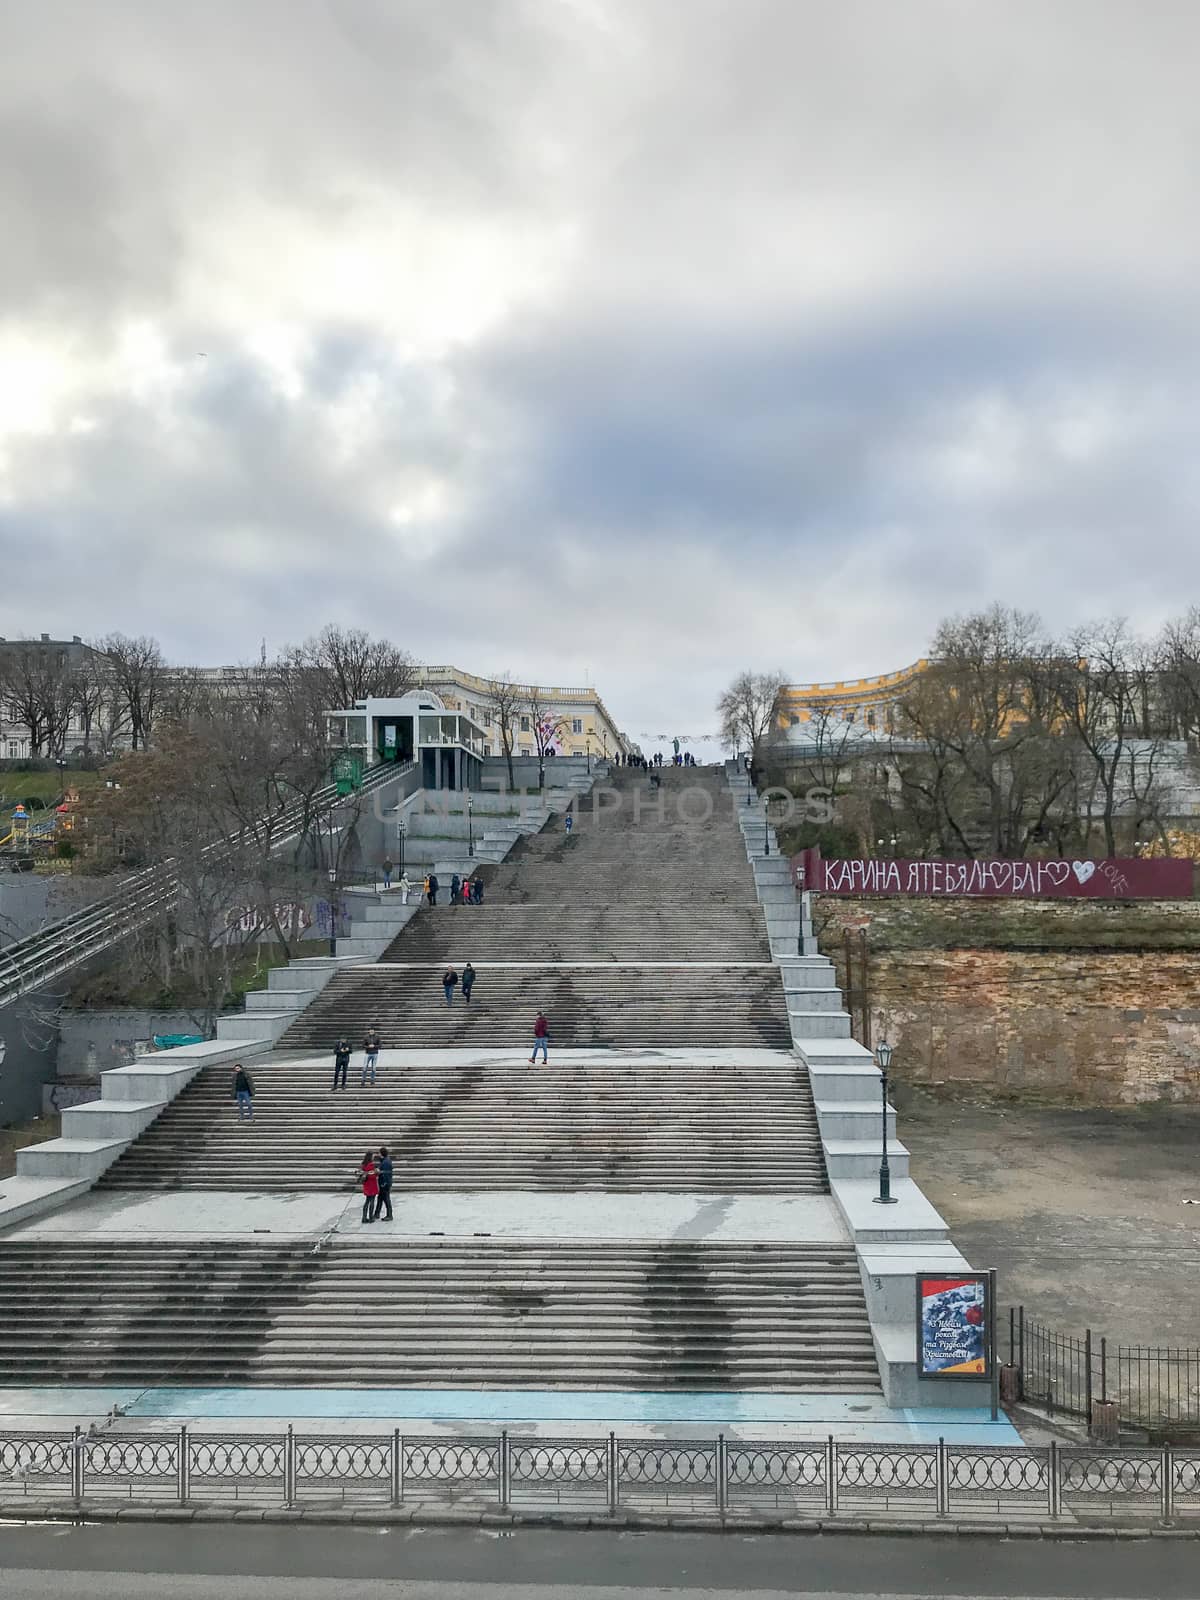 Odessa, Ukraine - December 30, 2017: Potemkin Stairs. The stairs are considered a formal entrance into the city from the direction of the sea and are the best known symbol of Odessa.